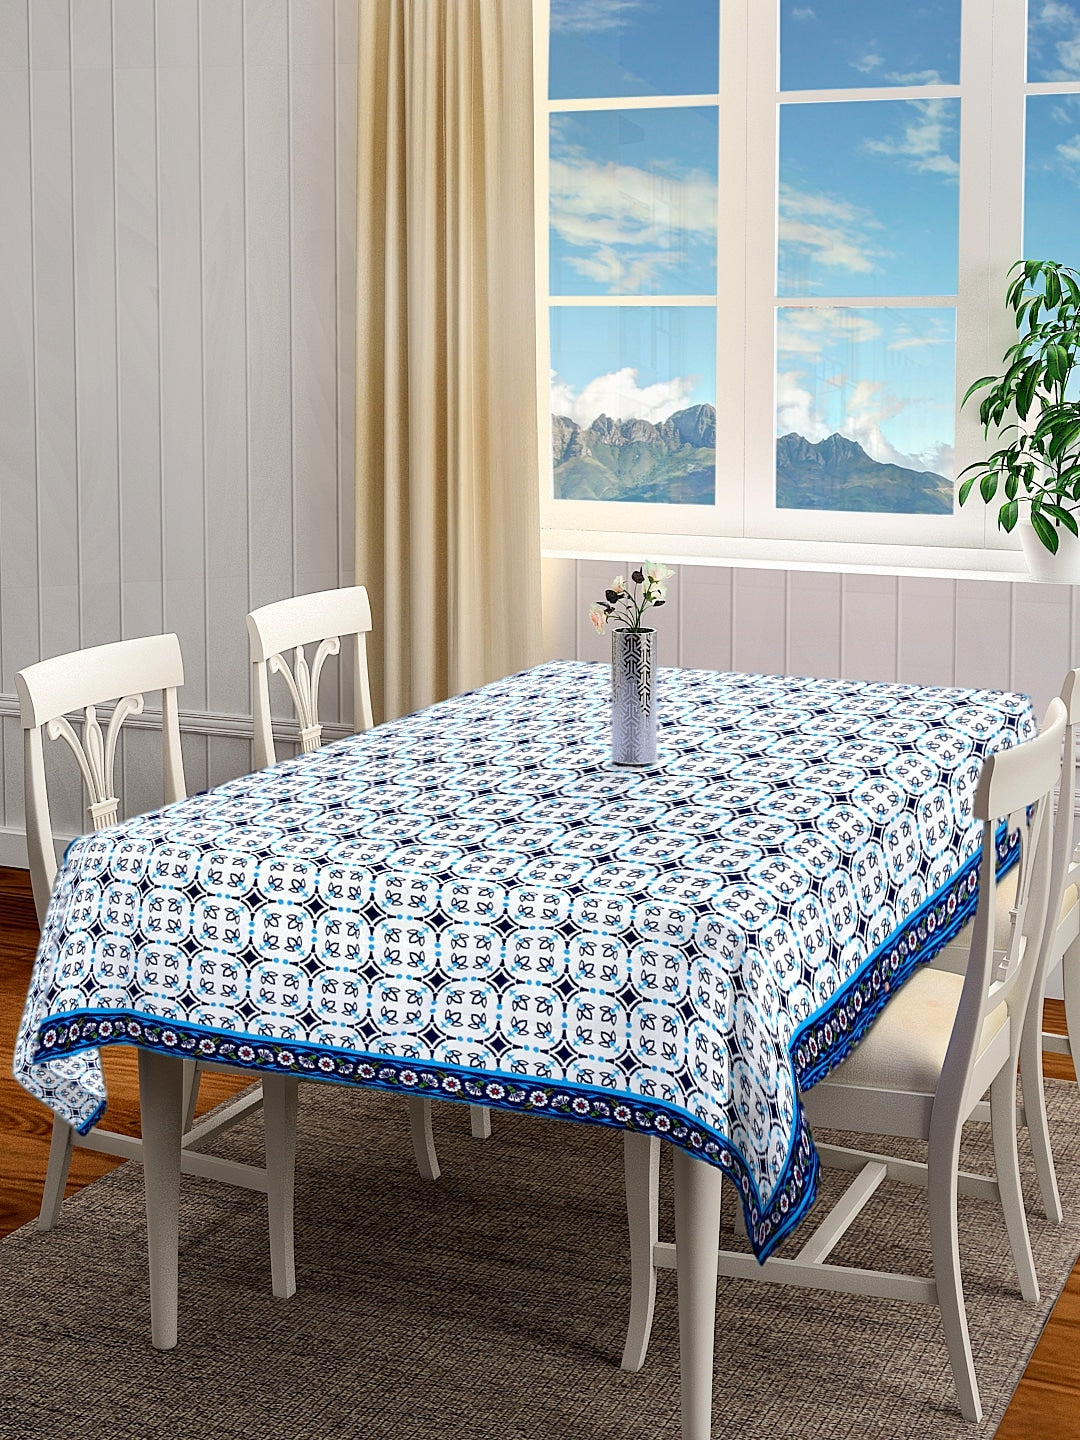 The Lotus Flower Printed Table Cloth